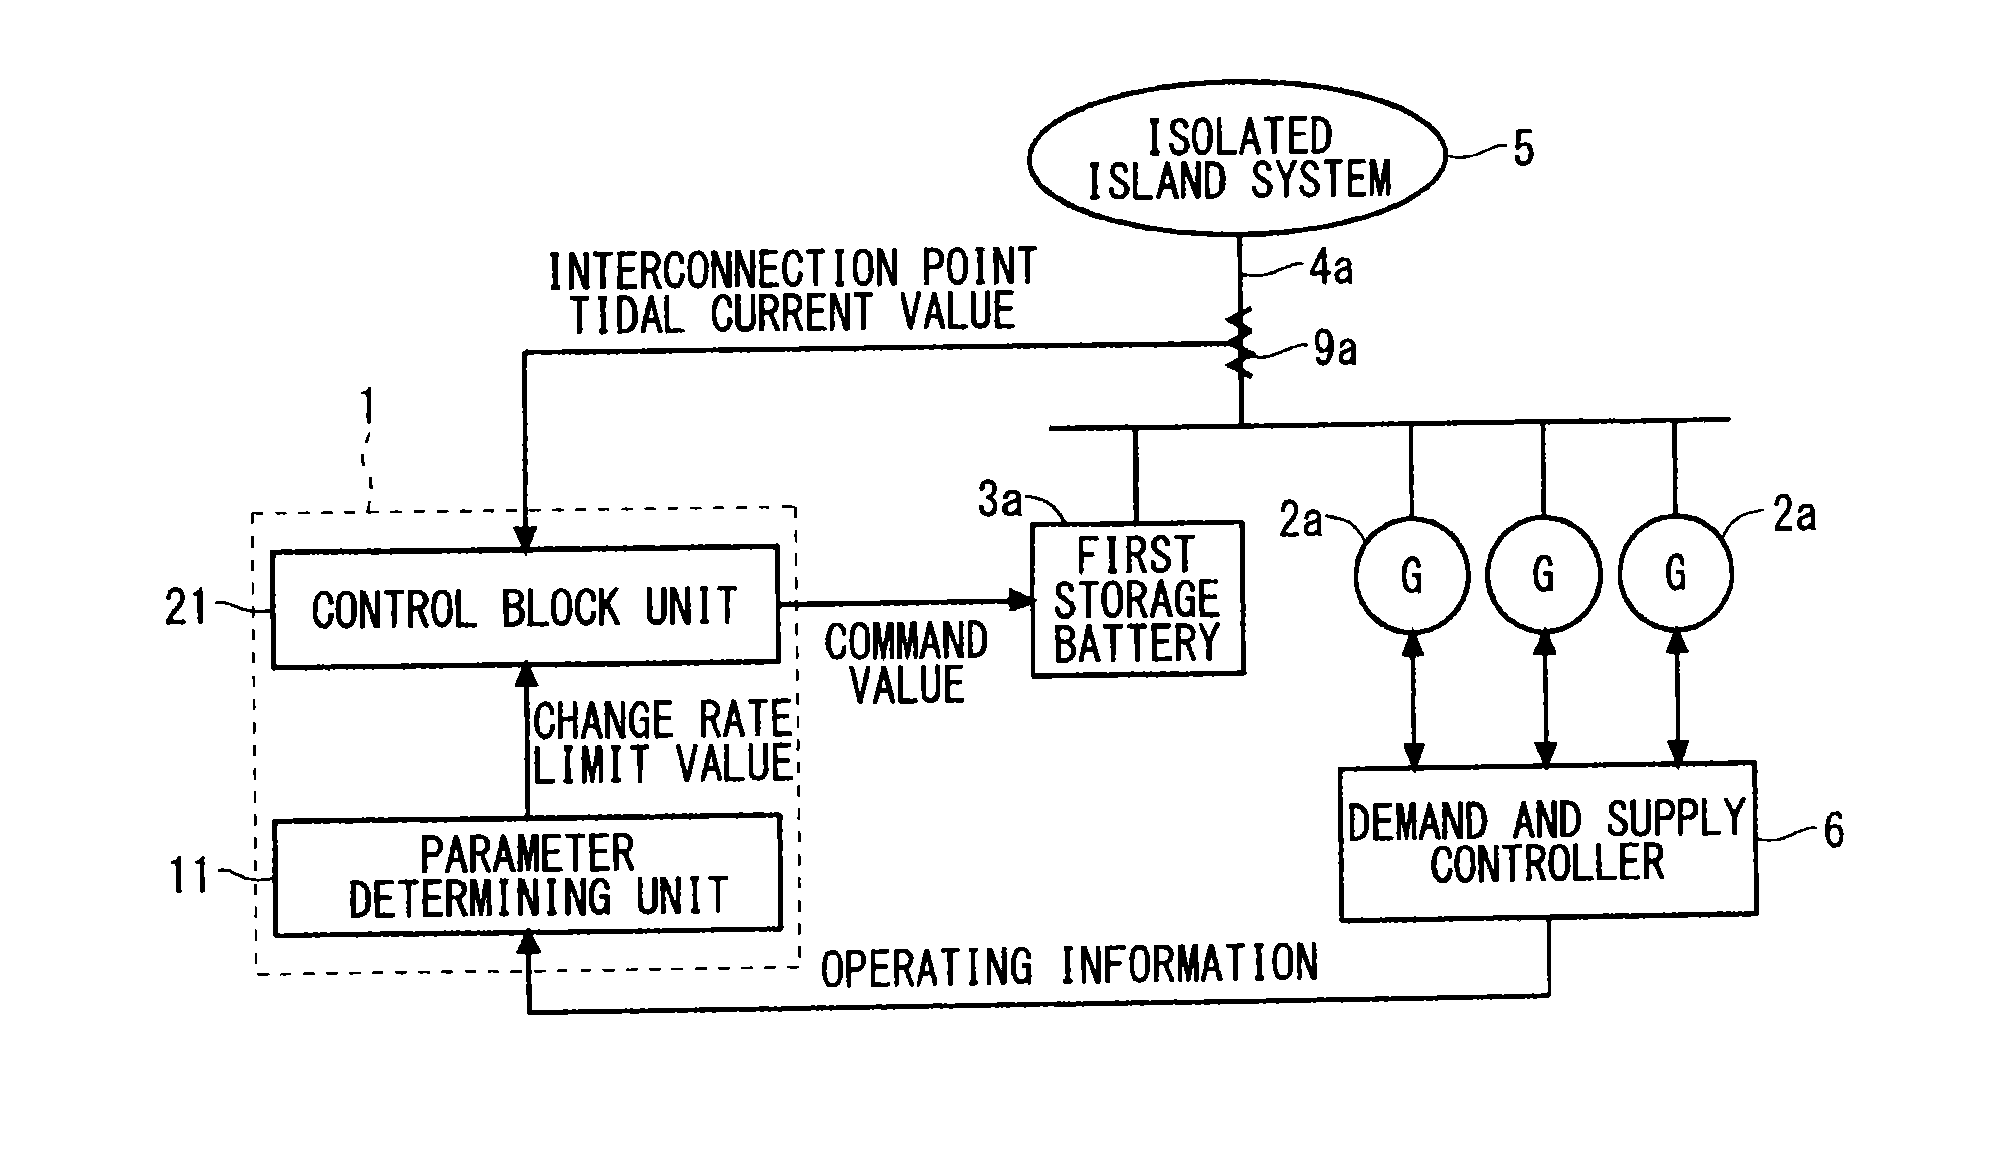 Frequency stabilizing apparatus for isolated system